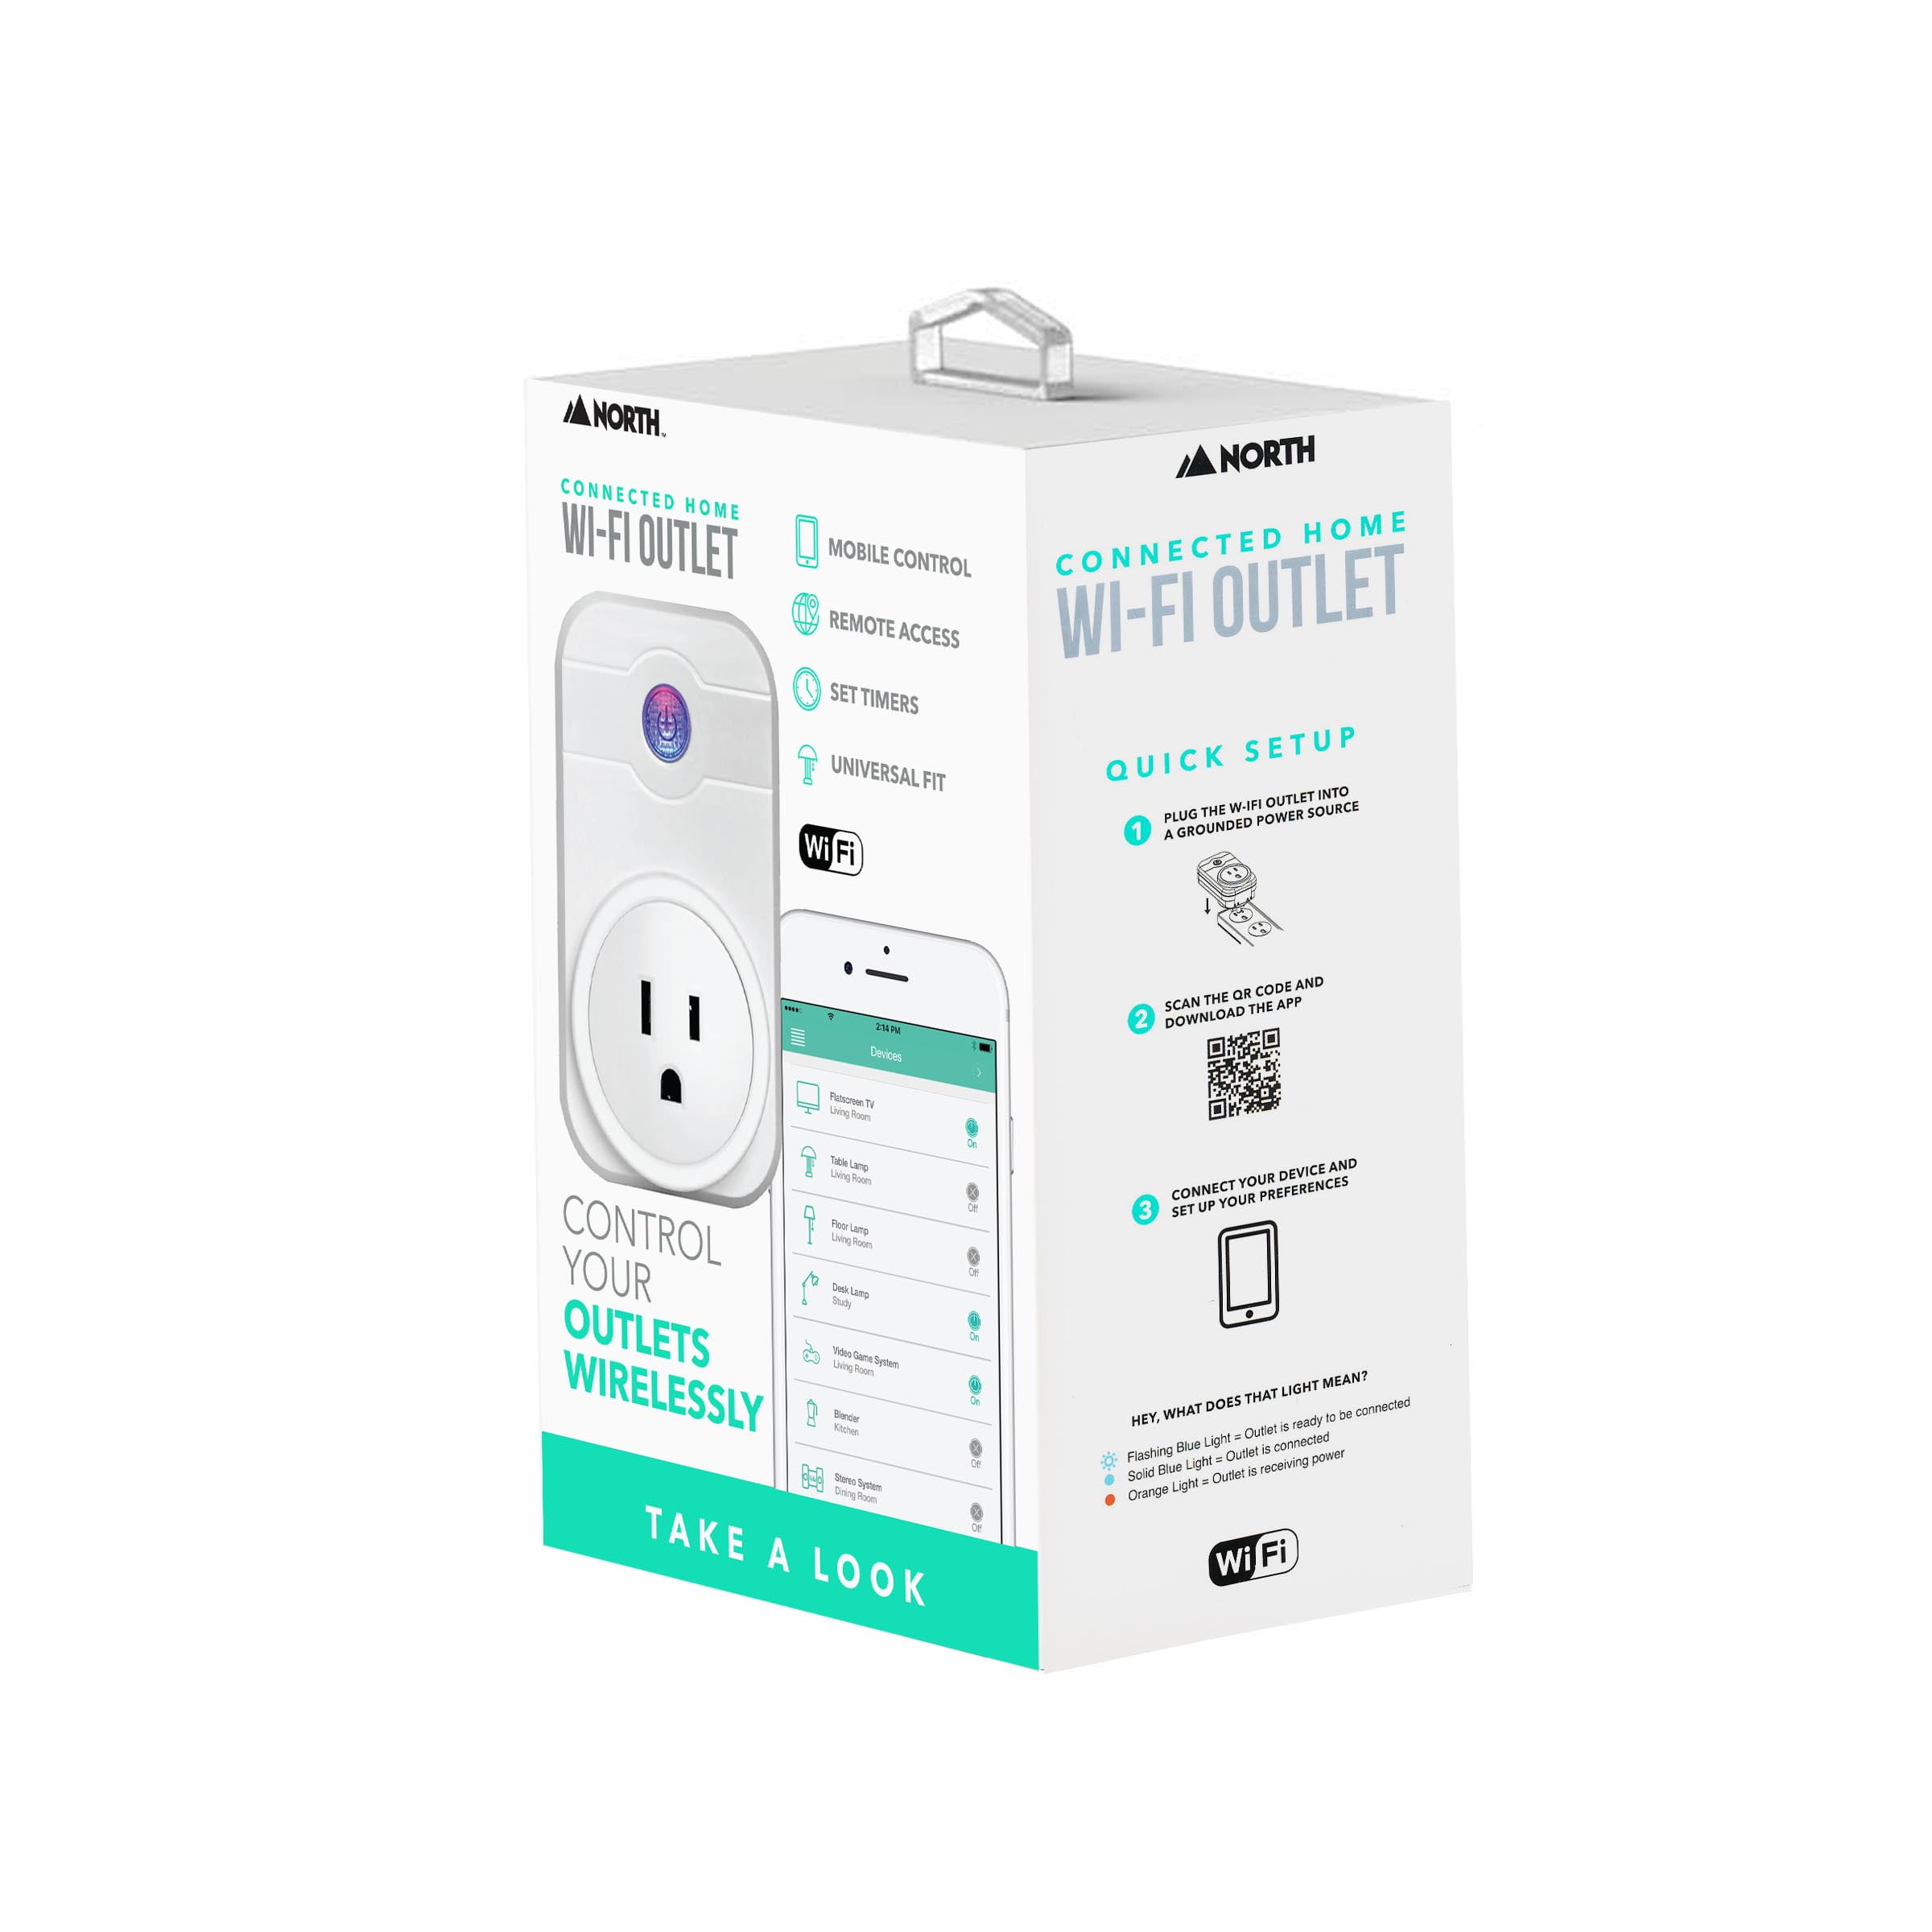 Smart Programmable Remote Control Outlet Switch Socket For Home, Office,  Factories, And Homes From Rosegal, $6.04